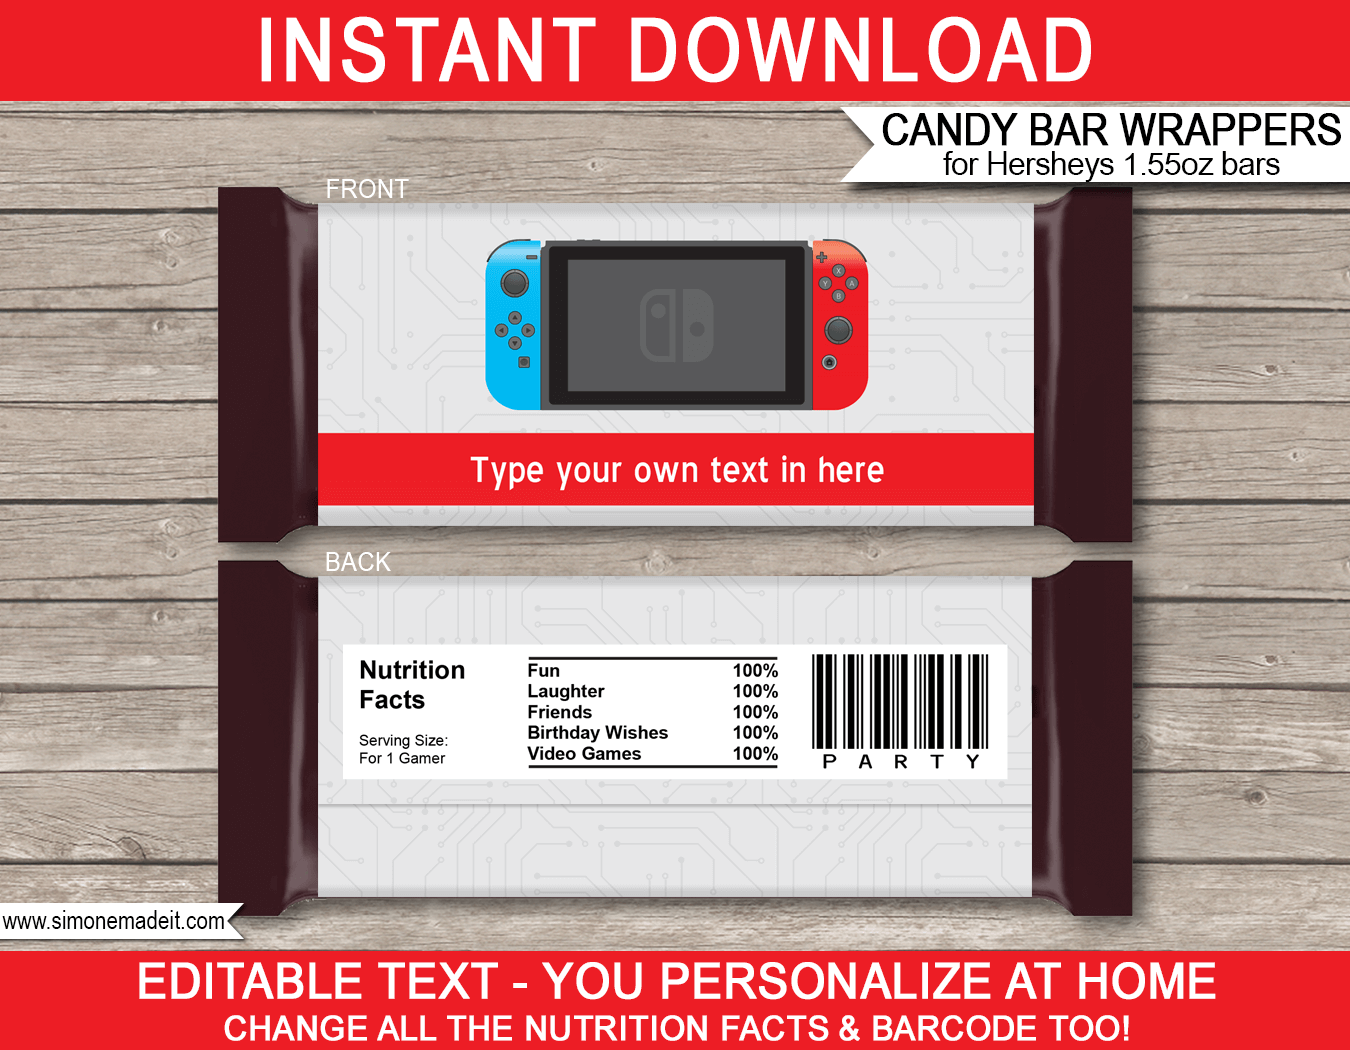 Nintendo Switch Theme Candy Bar Wrappers | Birthday Party Favors | Personalized Hershey Candy Bars | Editable Template | INSTANT DOWNLOAD $3.00 via simonemadeit.com